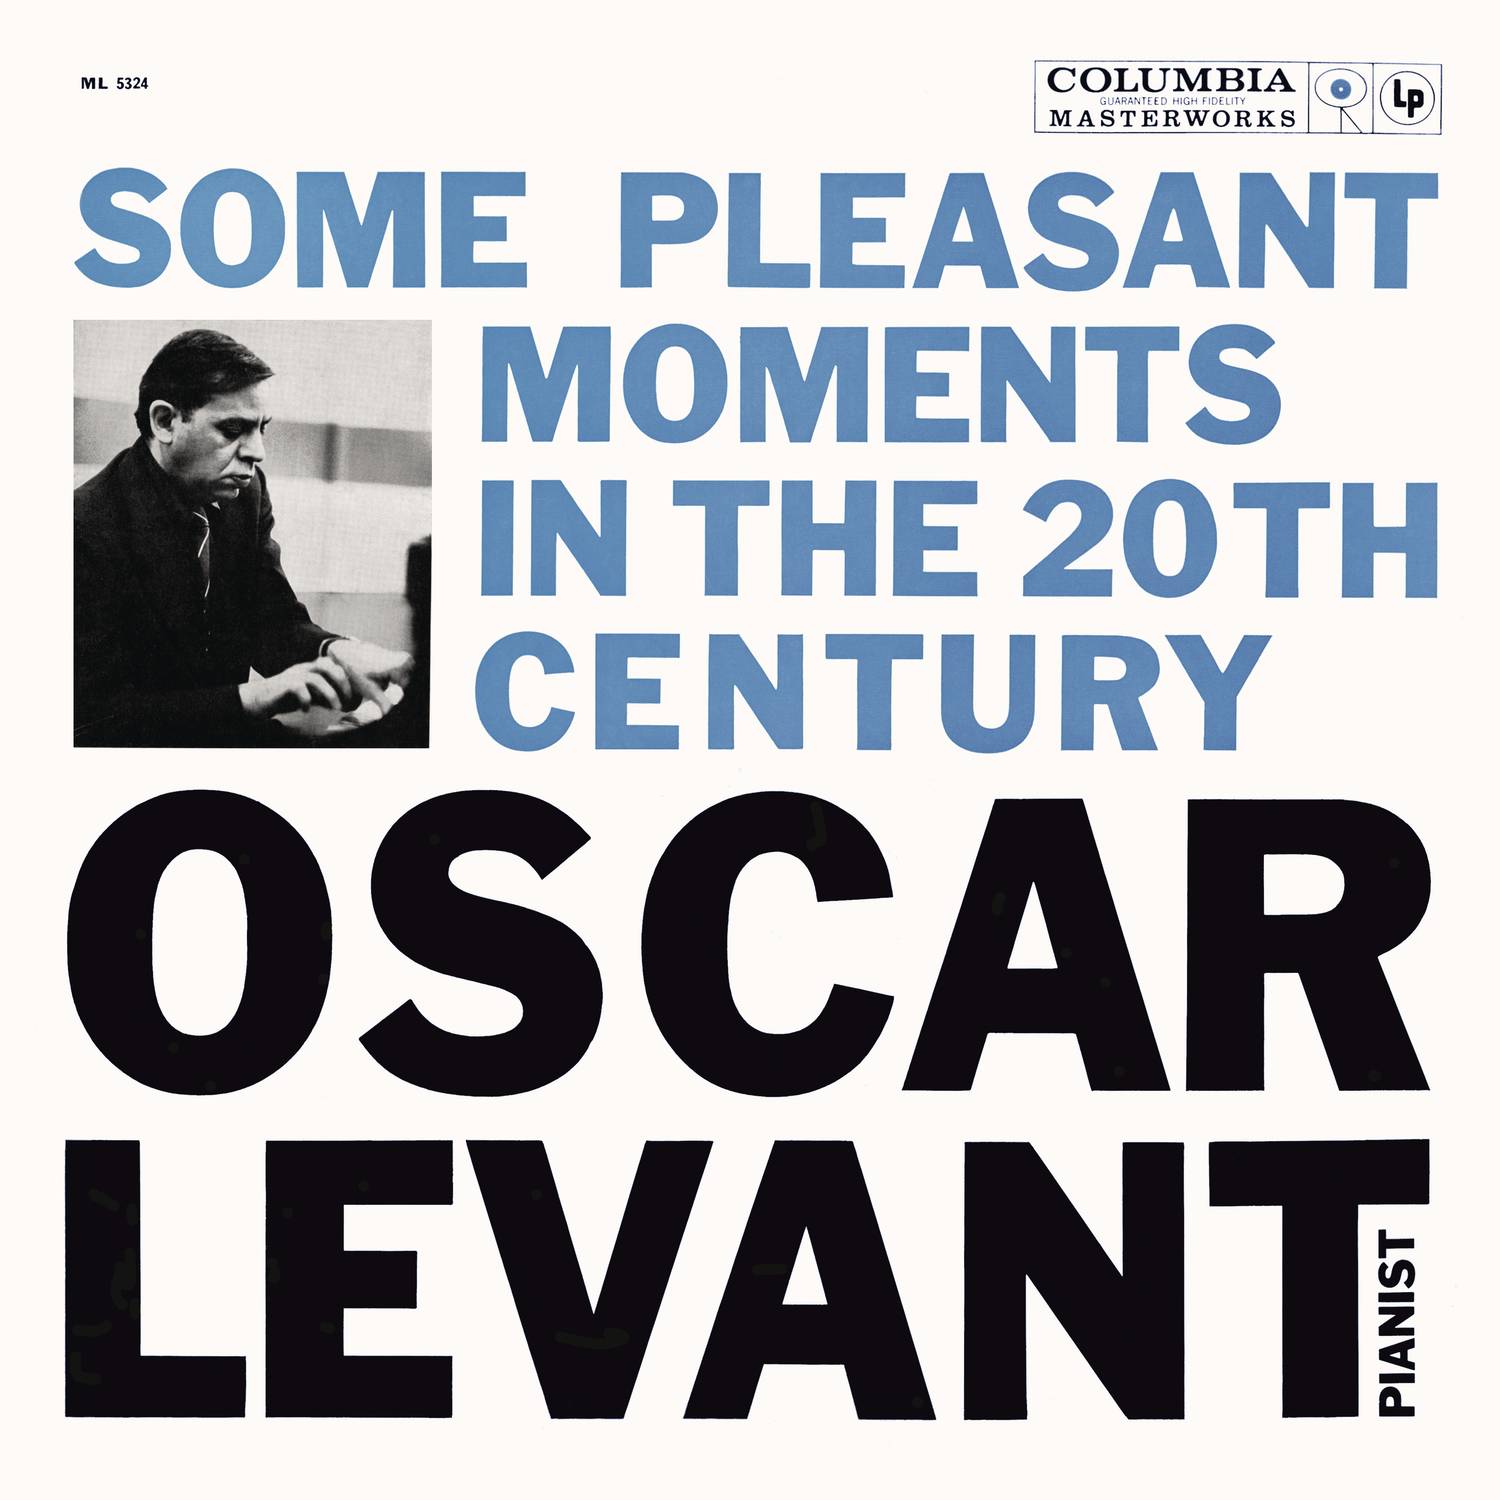 Oscar Levant - Some Pleasant Moments in the 20th Century